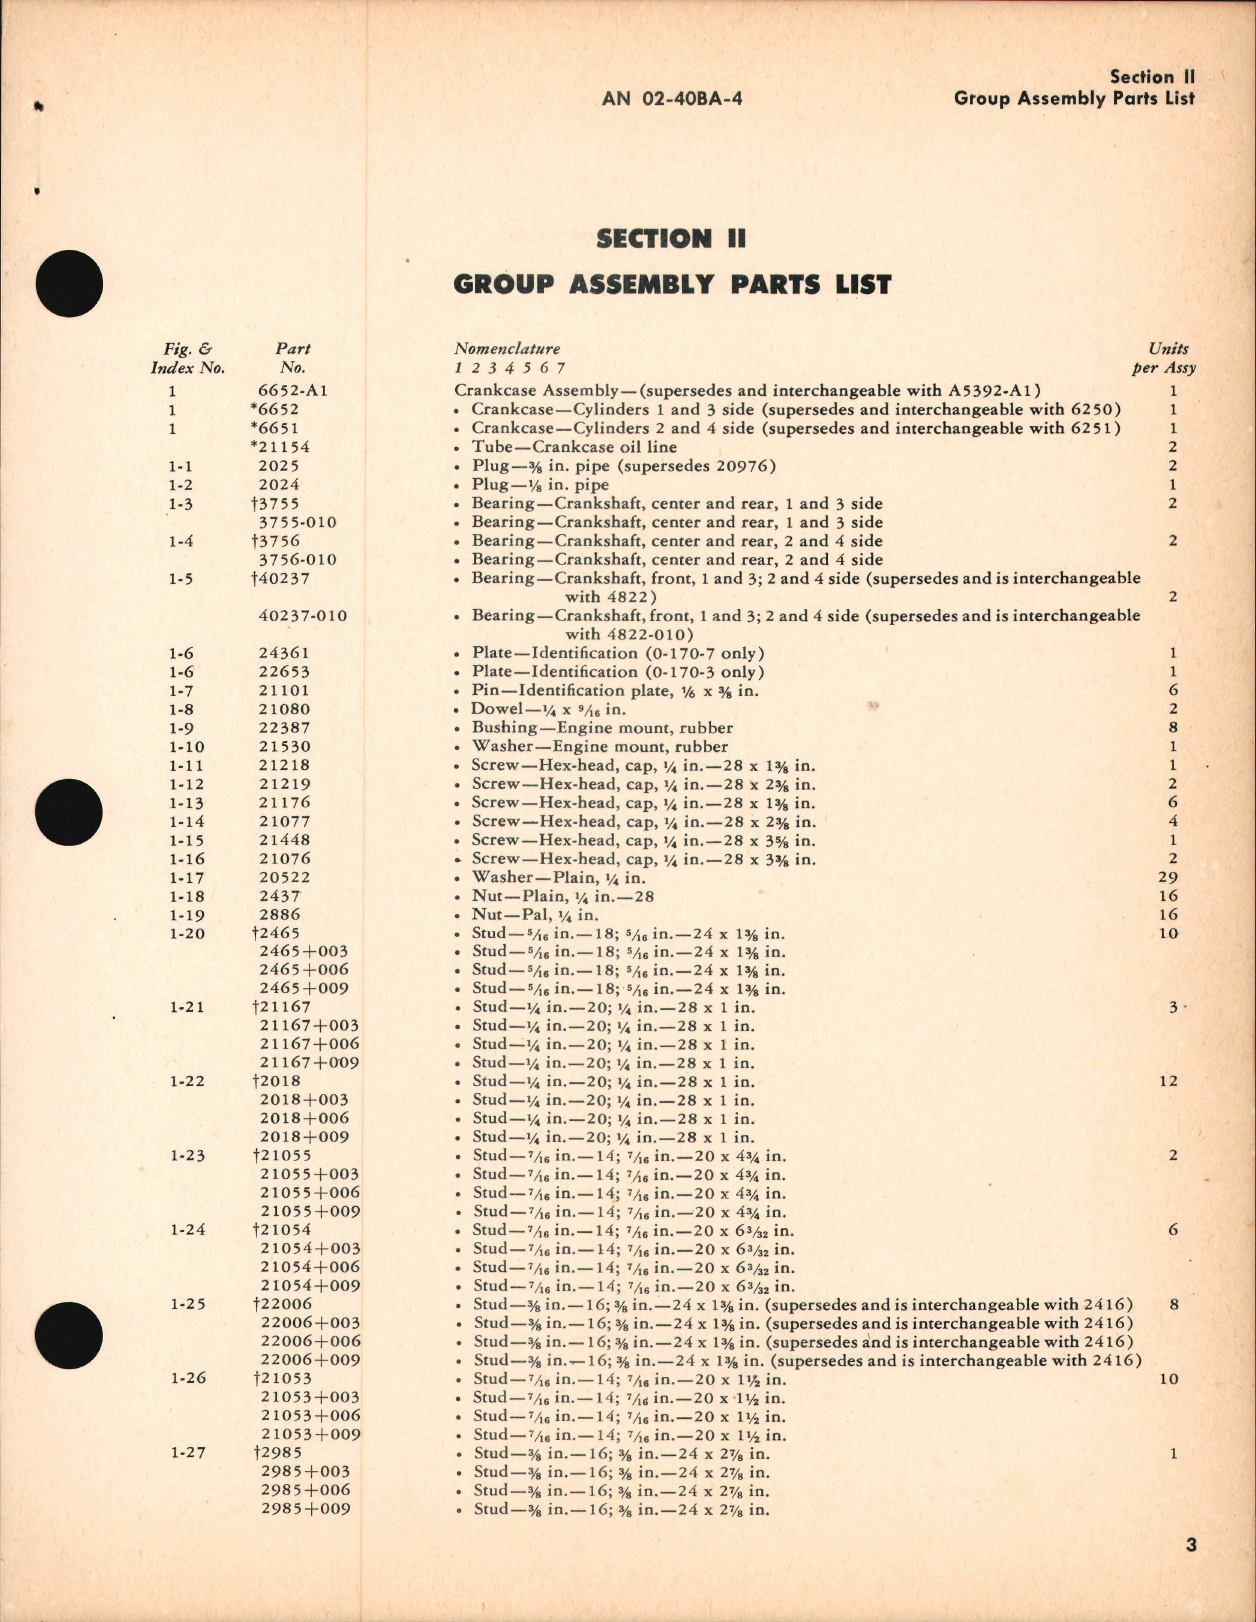 Sample page 7 from AirCorps Library document: Parts Catalog for 0-170-3 and 0-170-7 Engines